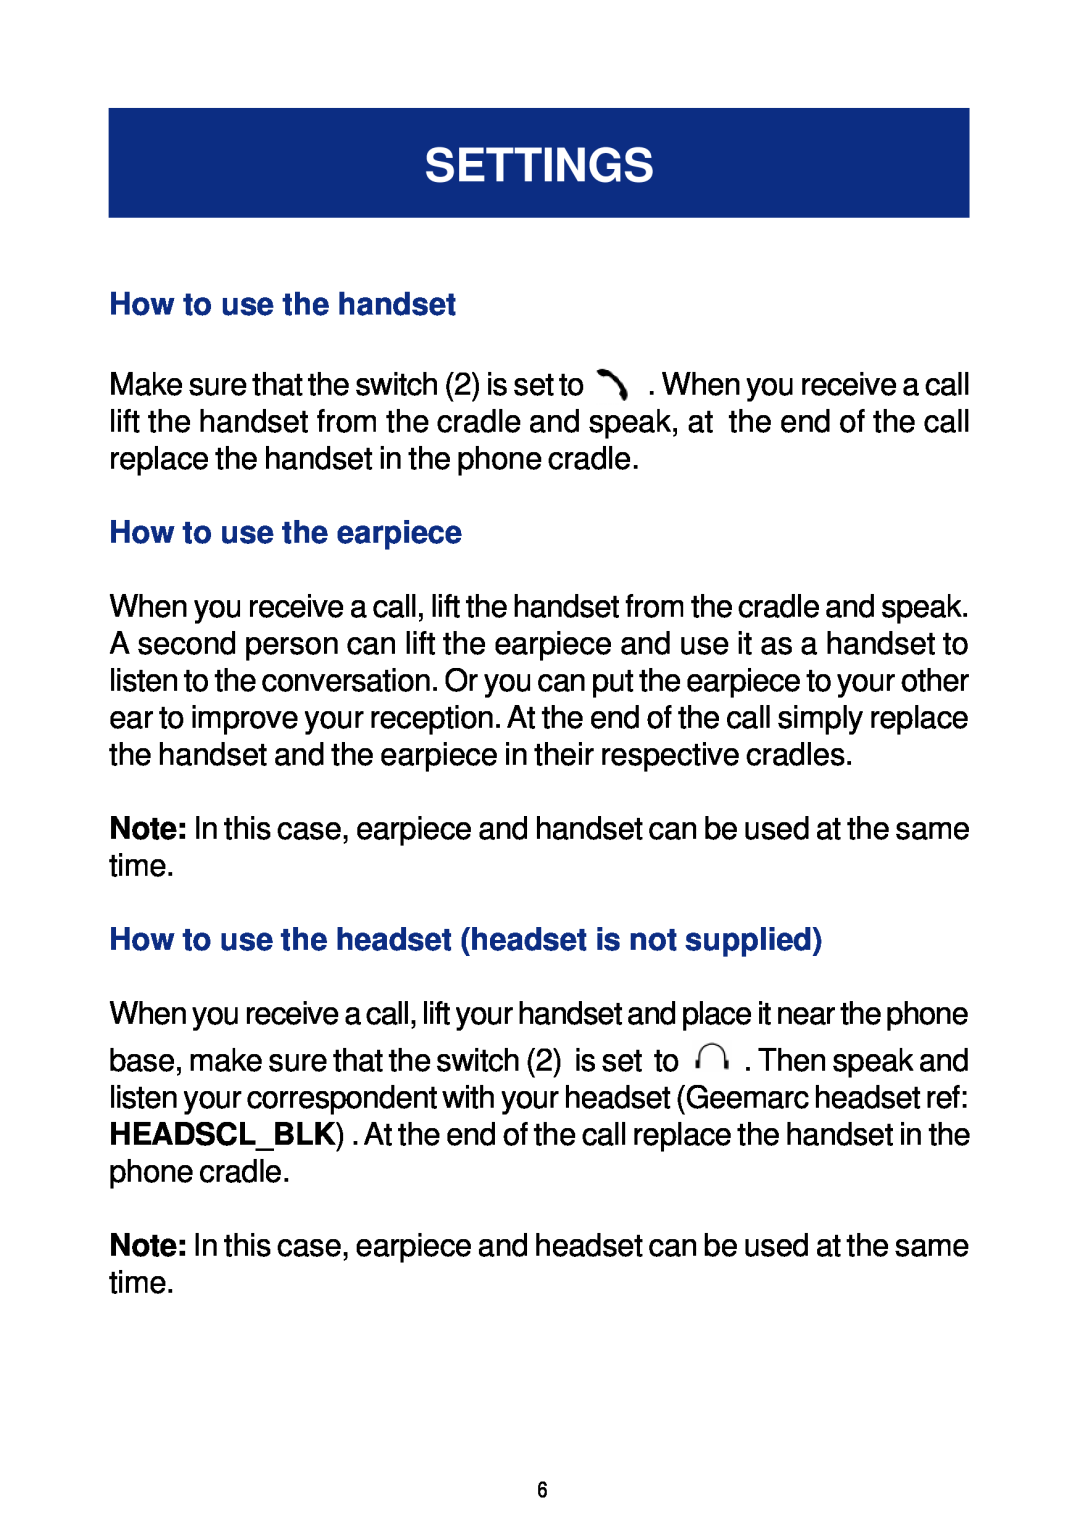 Geemarc CLA 1 How to use the handset, How to use the earpiece, How to use the headset headset is not supplied, Settings 